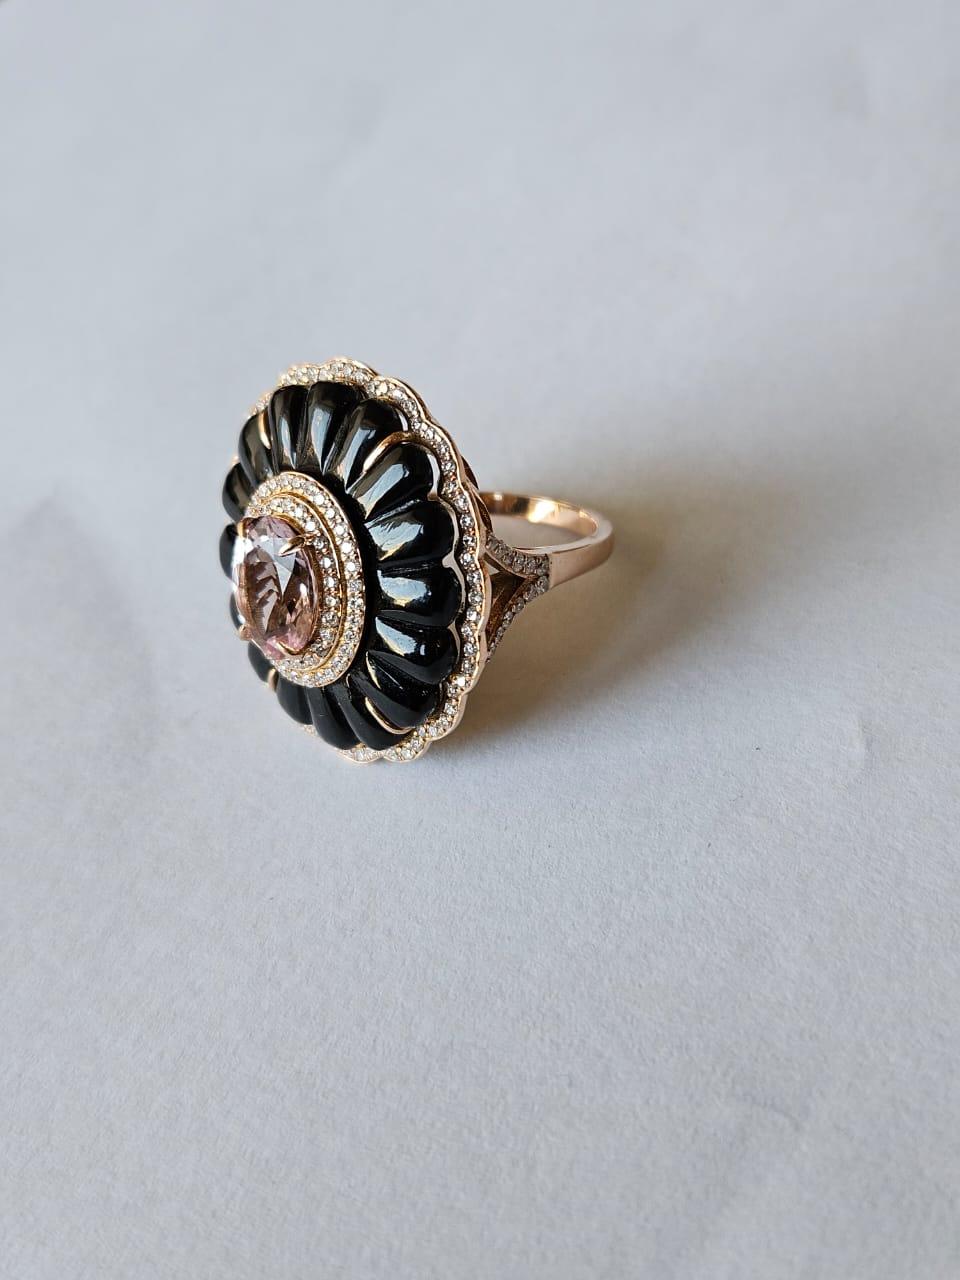 Oval Cut Set in 18K Gold, Art deco style, Morganite, Black Onyx & Diamonds Cocktail Ring For Sale